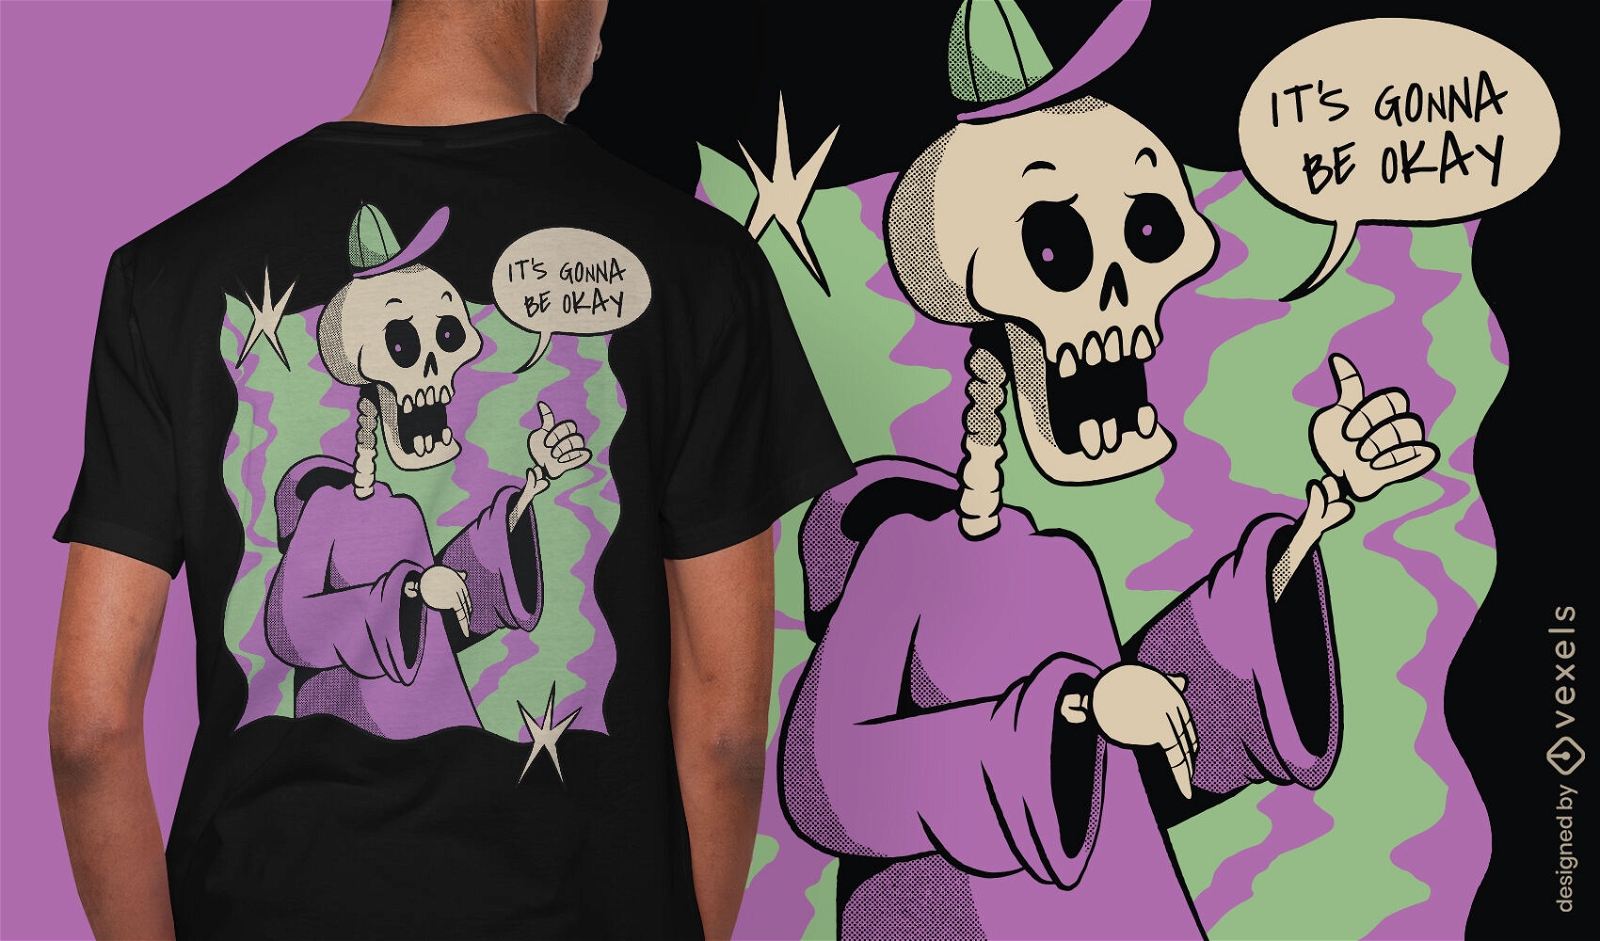 Skeleton being supportive t-shirt design